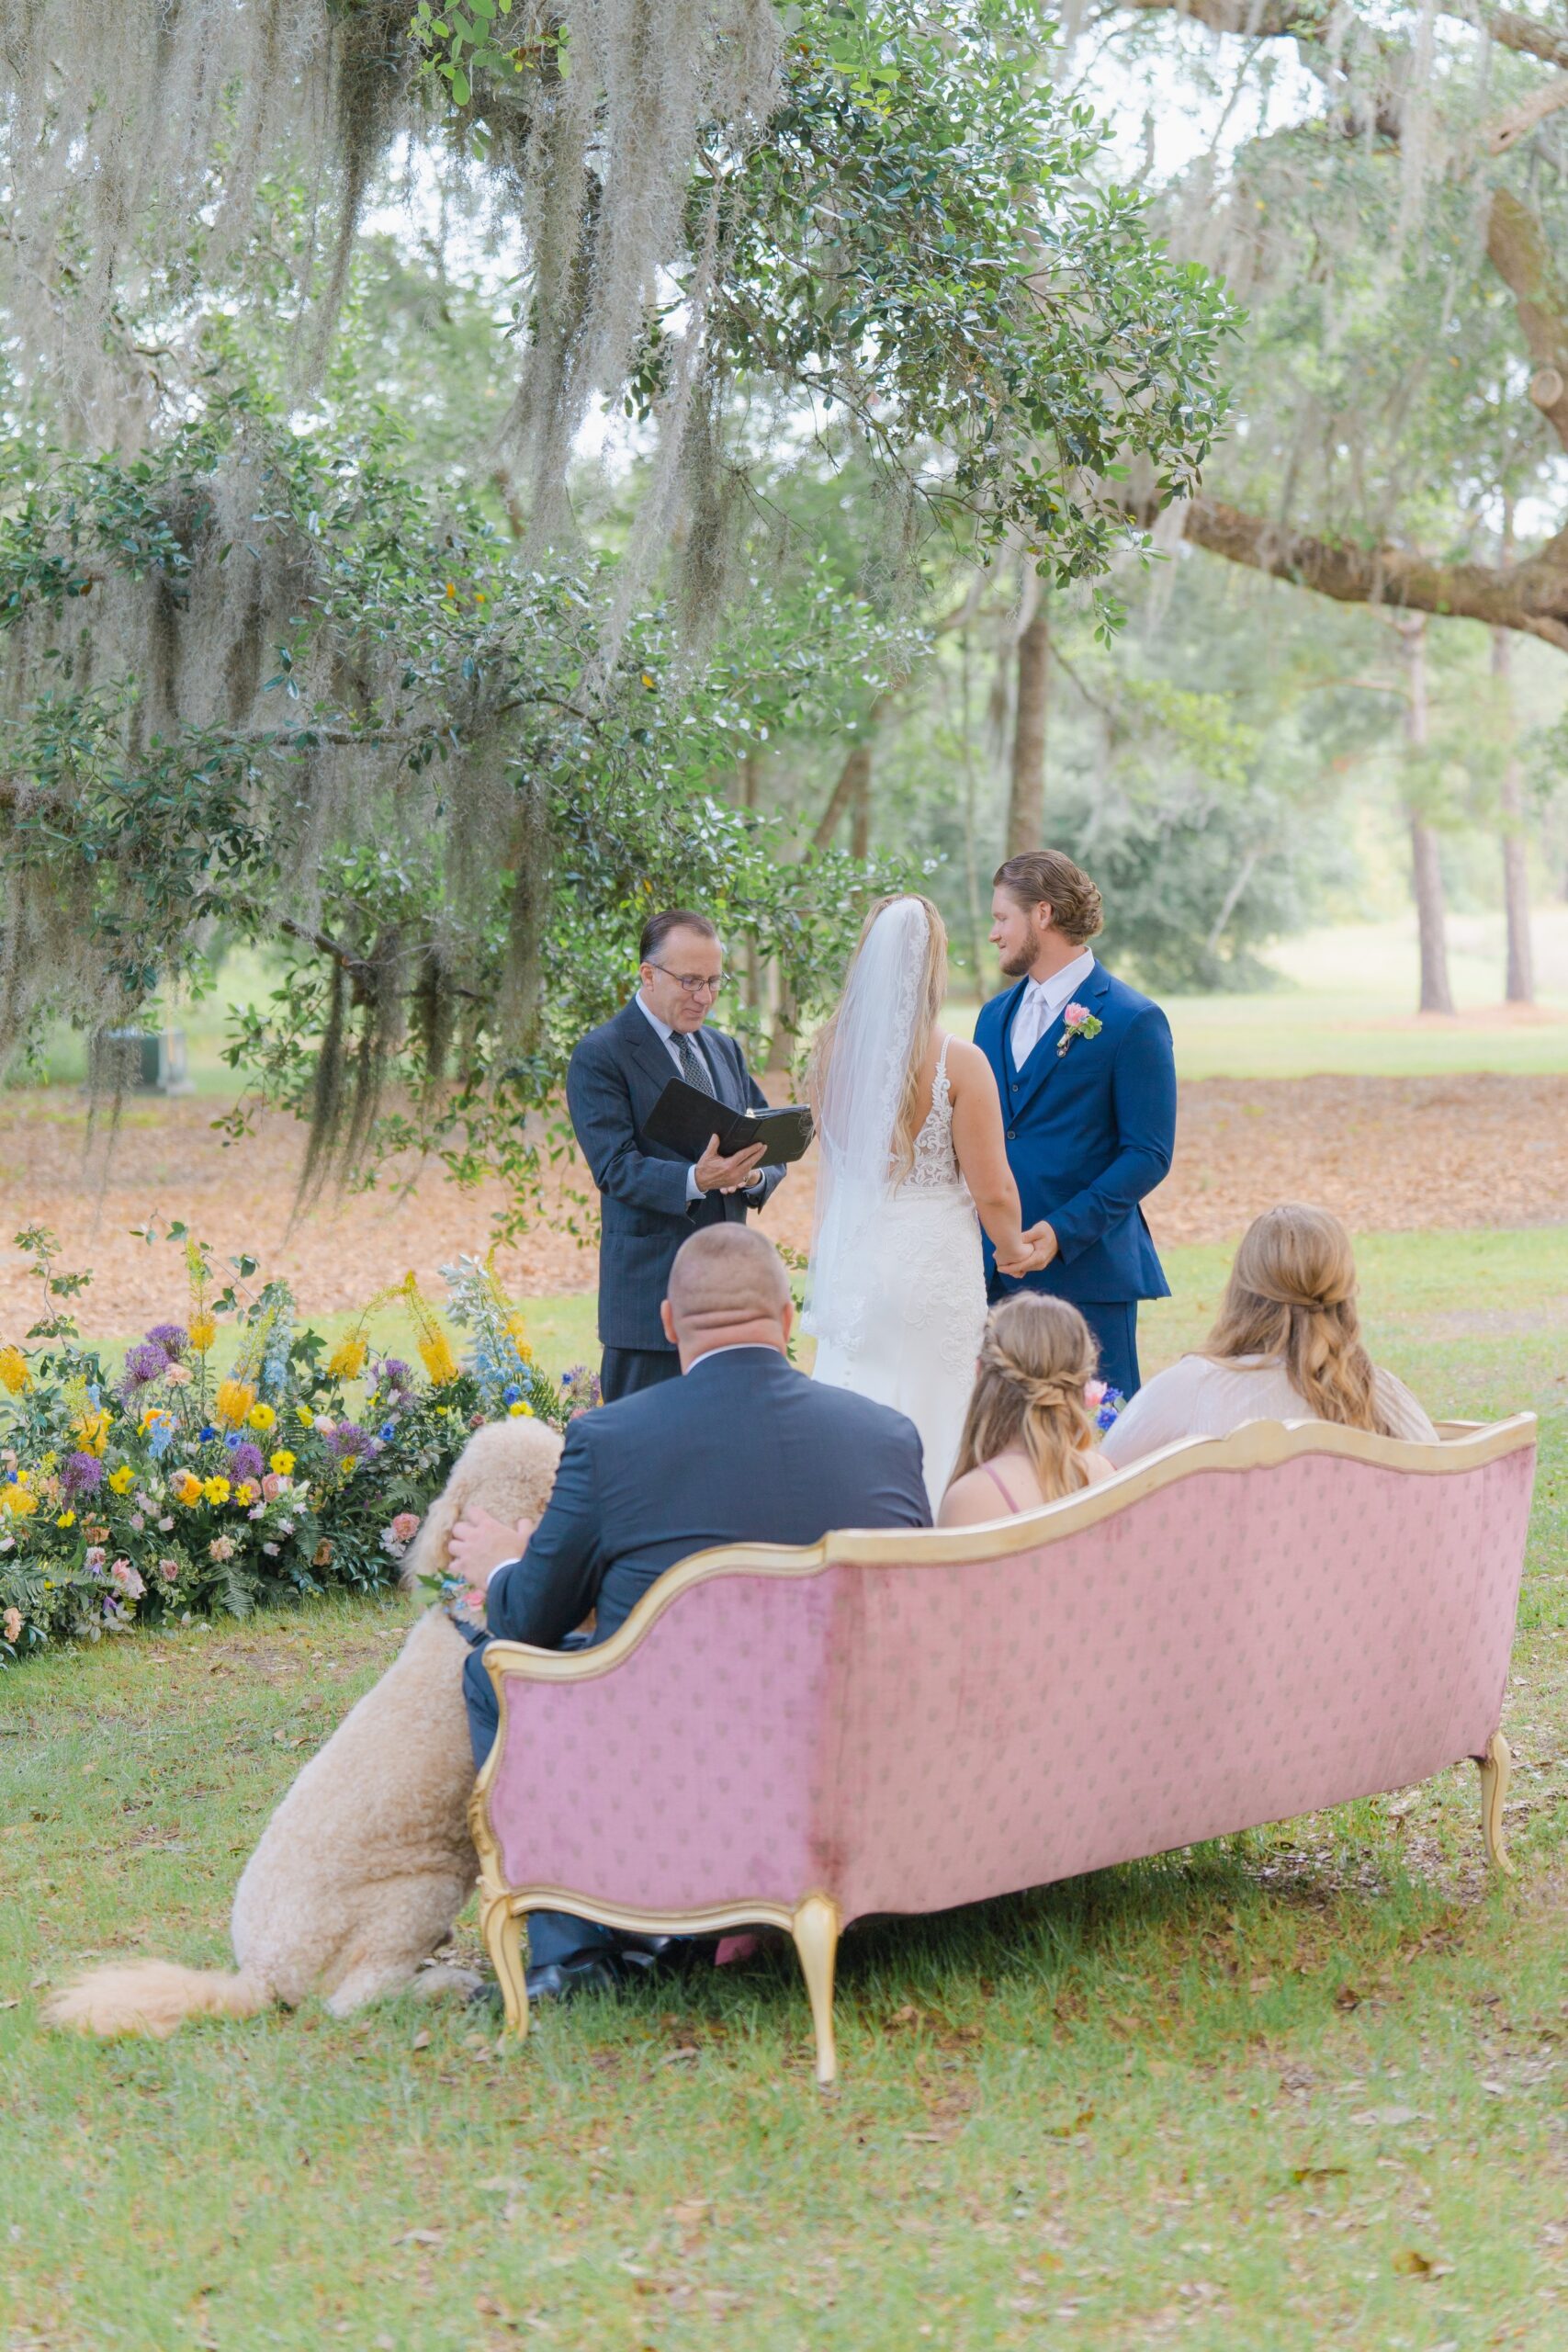 spring wedding ceremony with pink vintage couch and goldendoodle